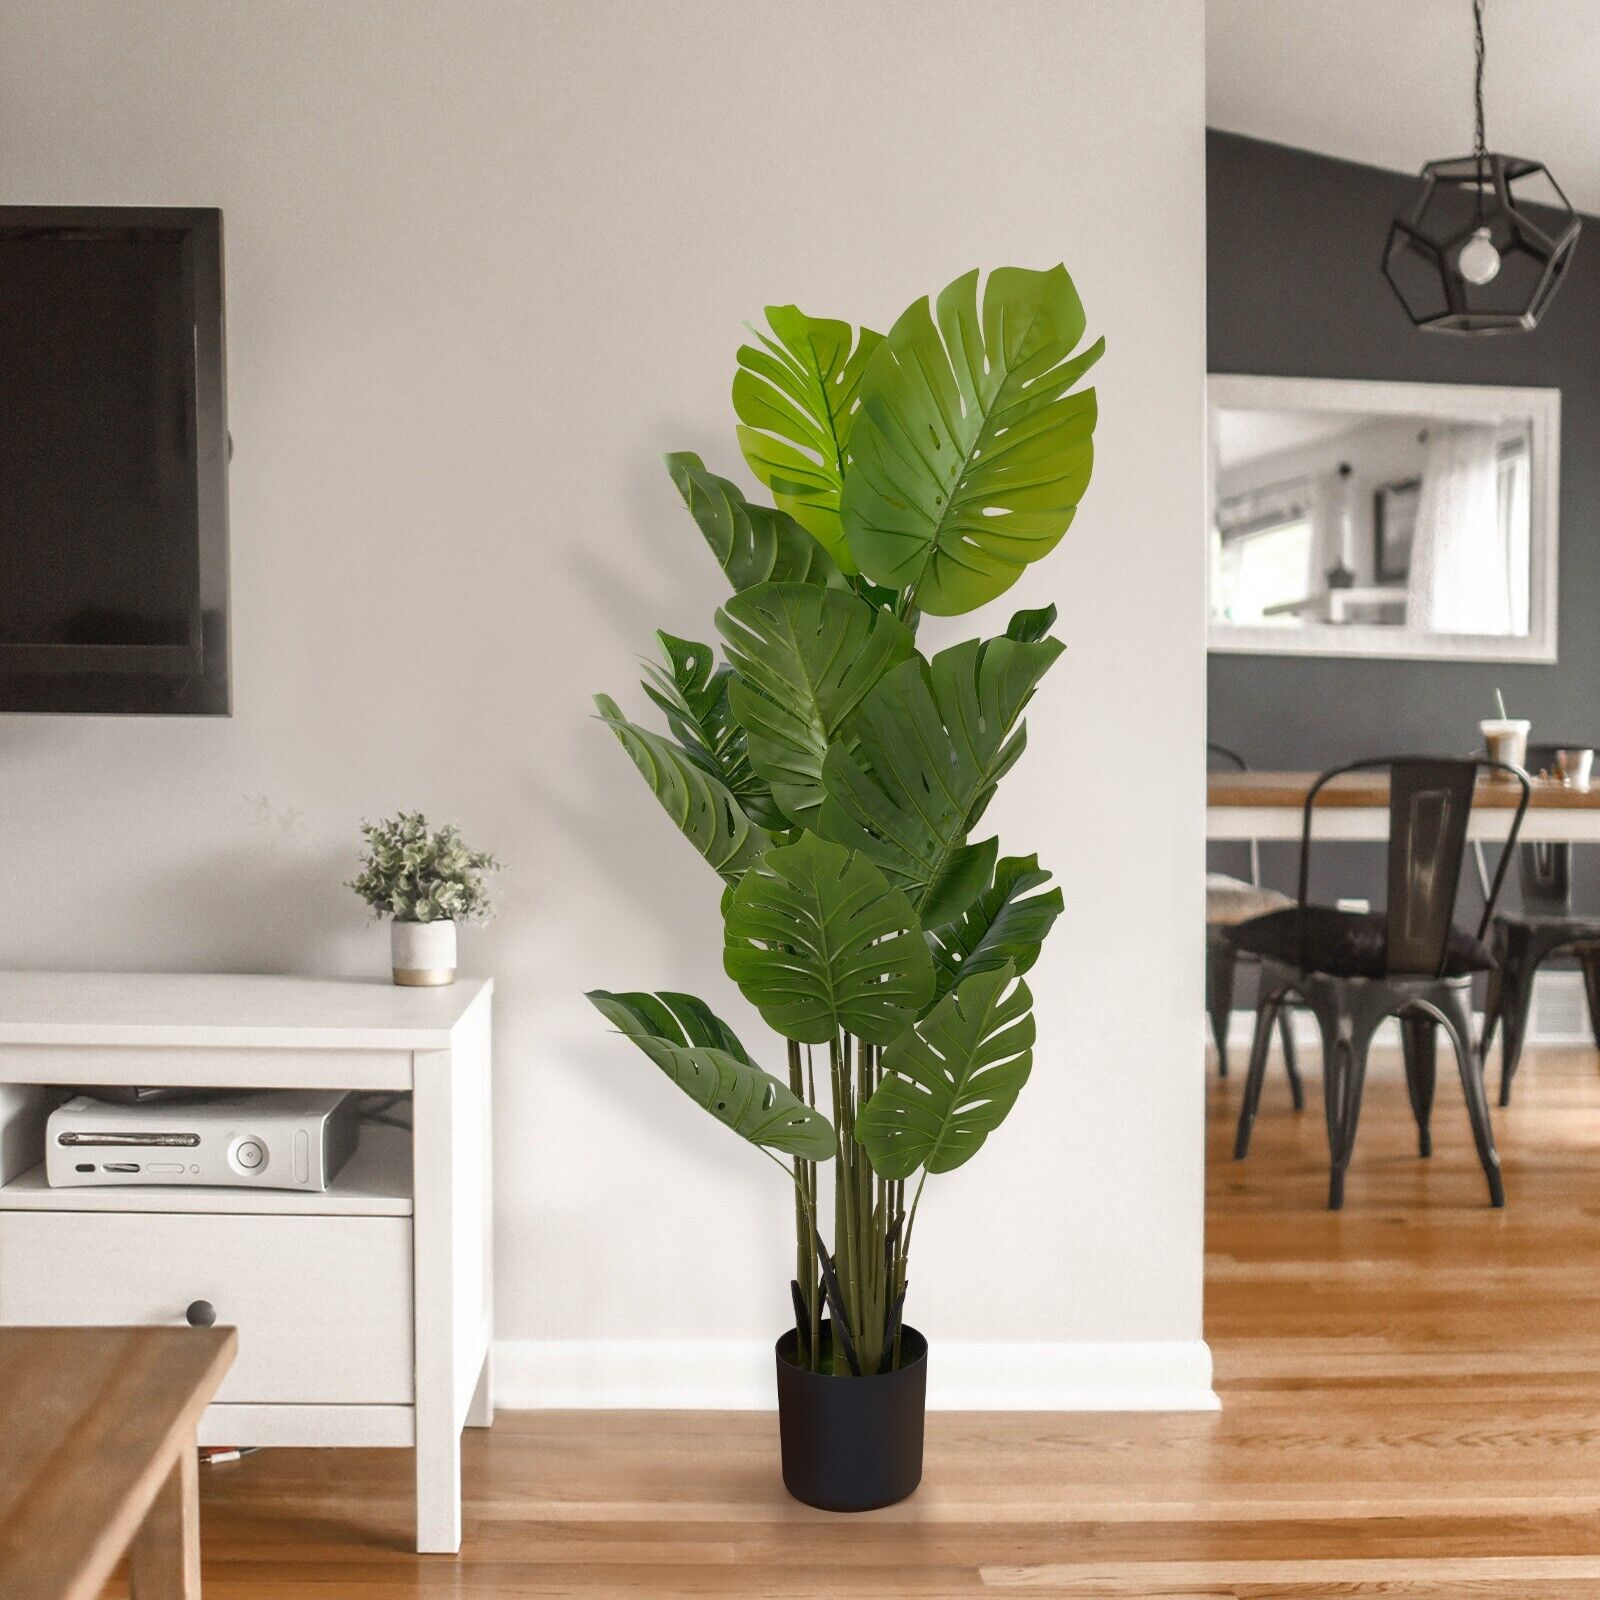 5' Artificial Monstera Plant in Pot Tree with 15 Decorative Leaves Faux Plant with Pot